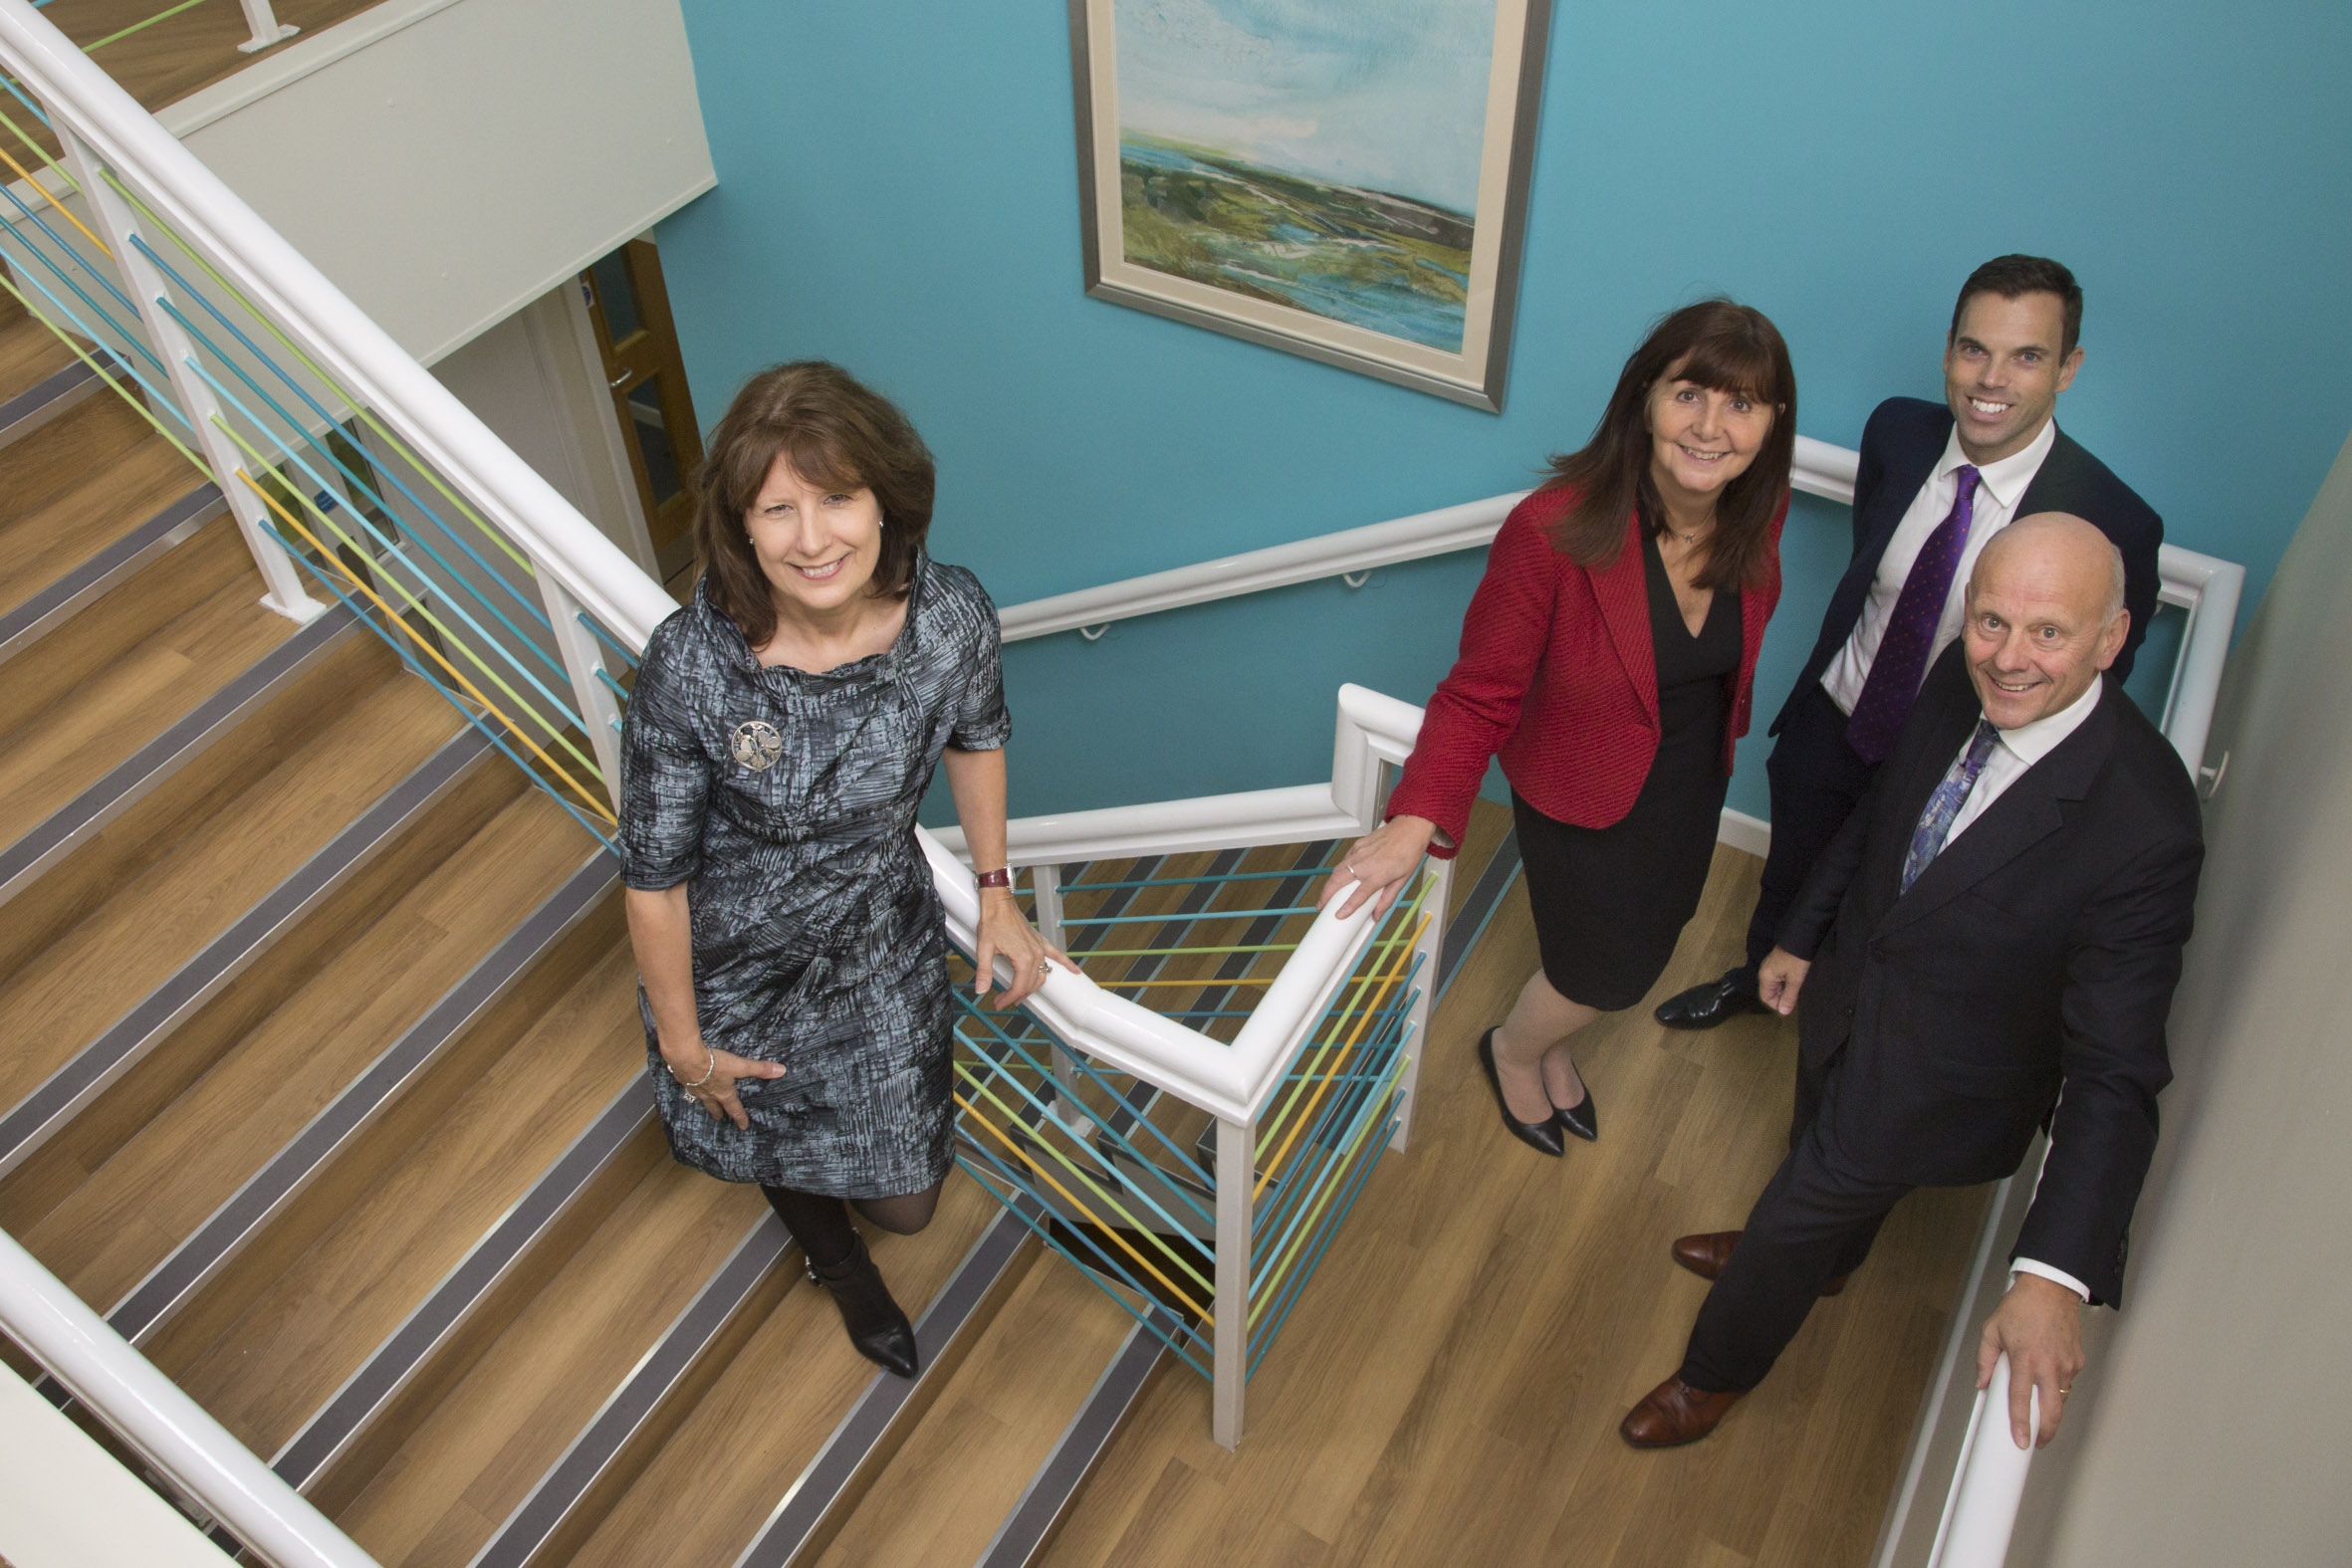 Wales’ first virtual care home sparks economic renaissance in Wrexham